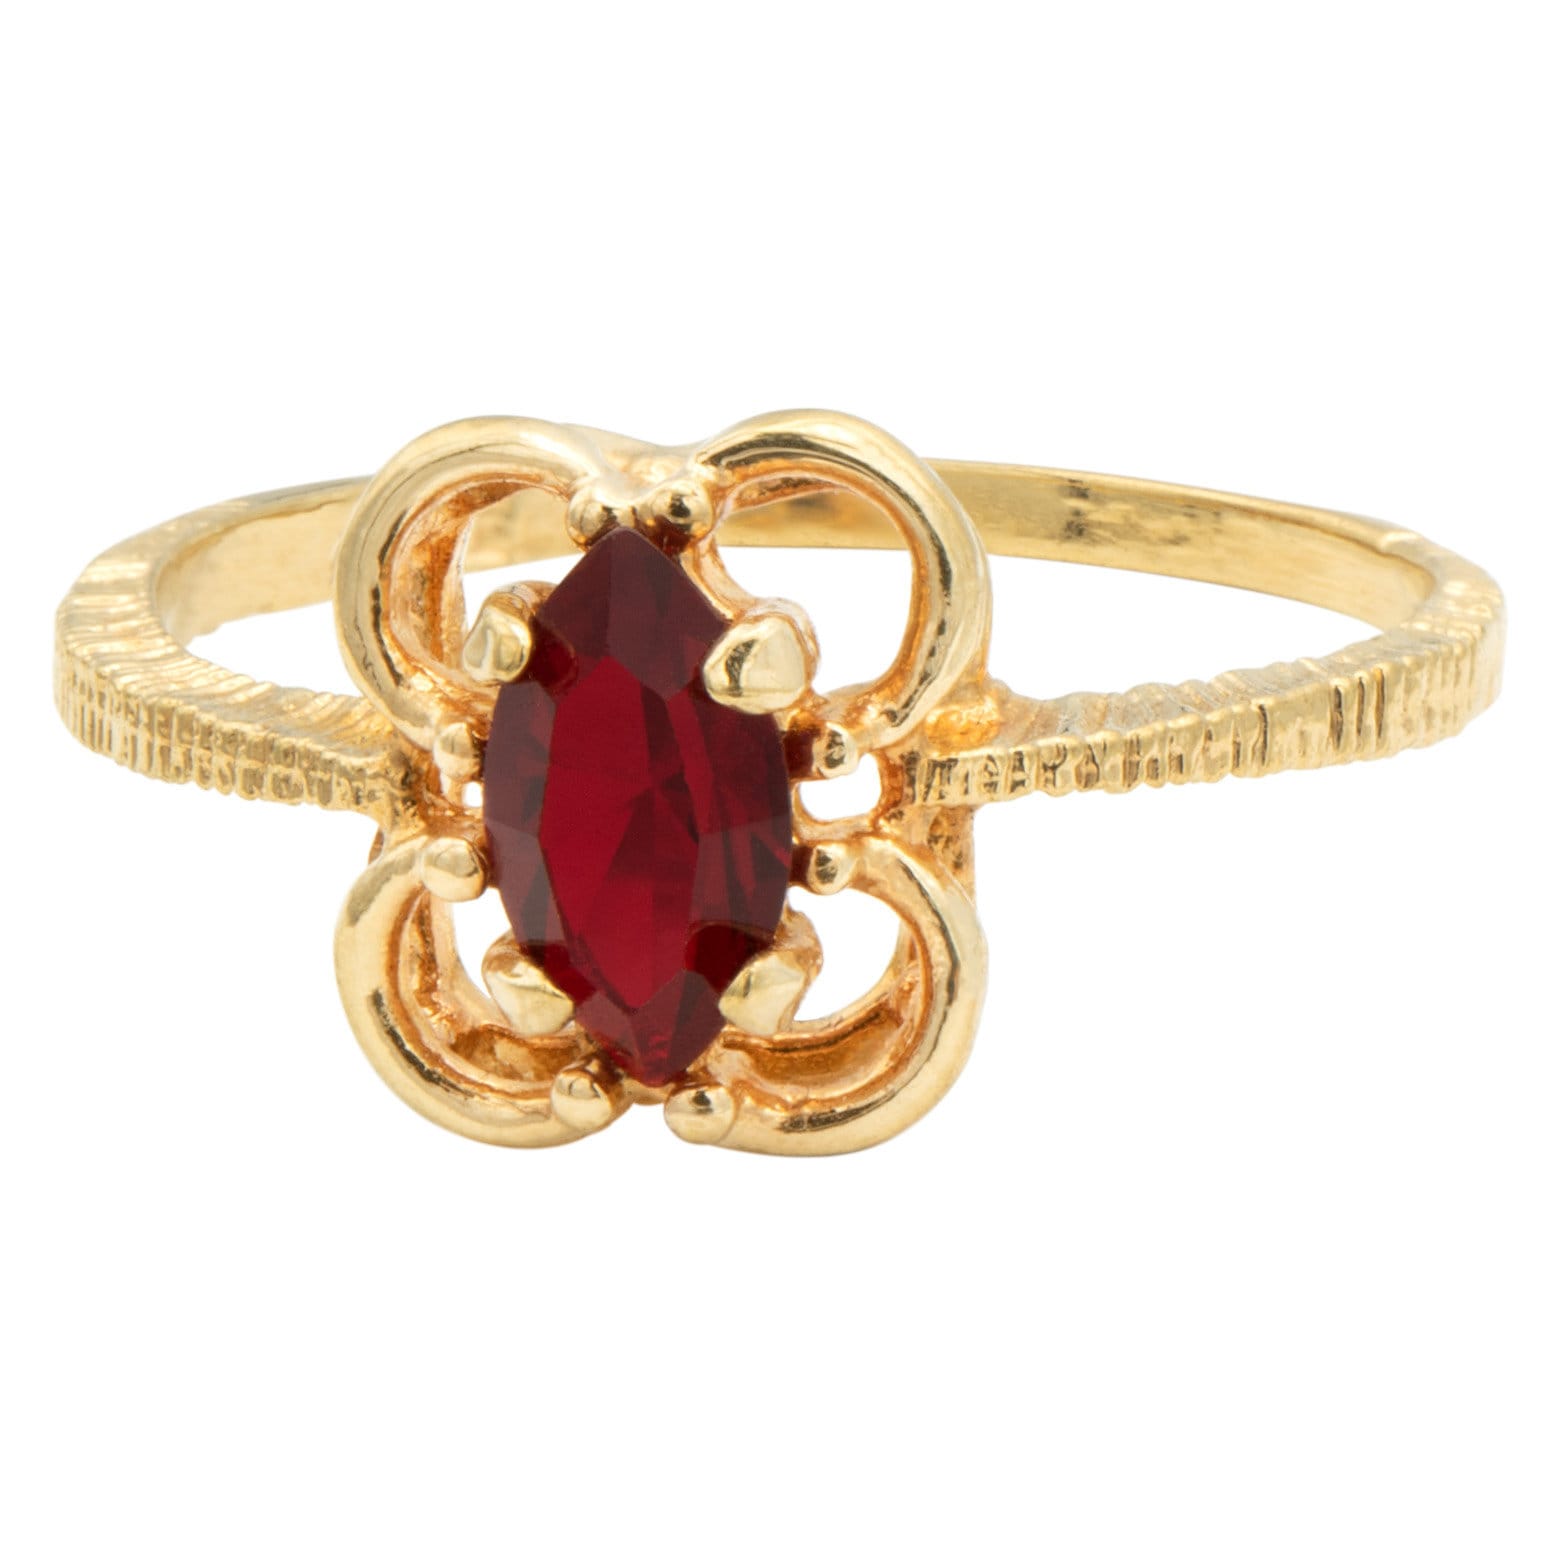 Vintage Ring Ruby Austrian Crystal Ring 18k Gold Antique Womans Handmade Dainty Bodo Midcentry Jewelry R586 - Limited Stock - Never Worn